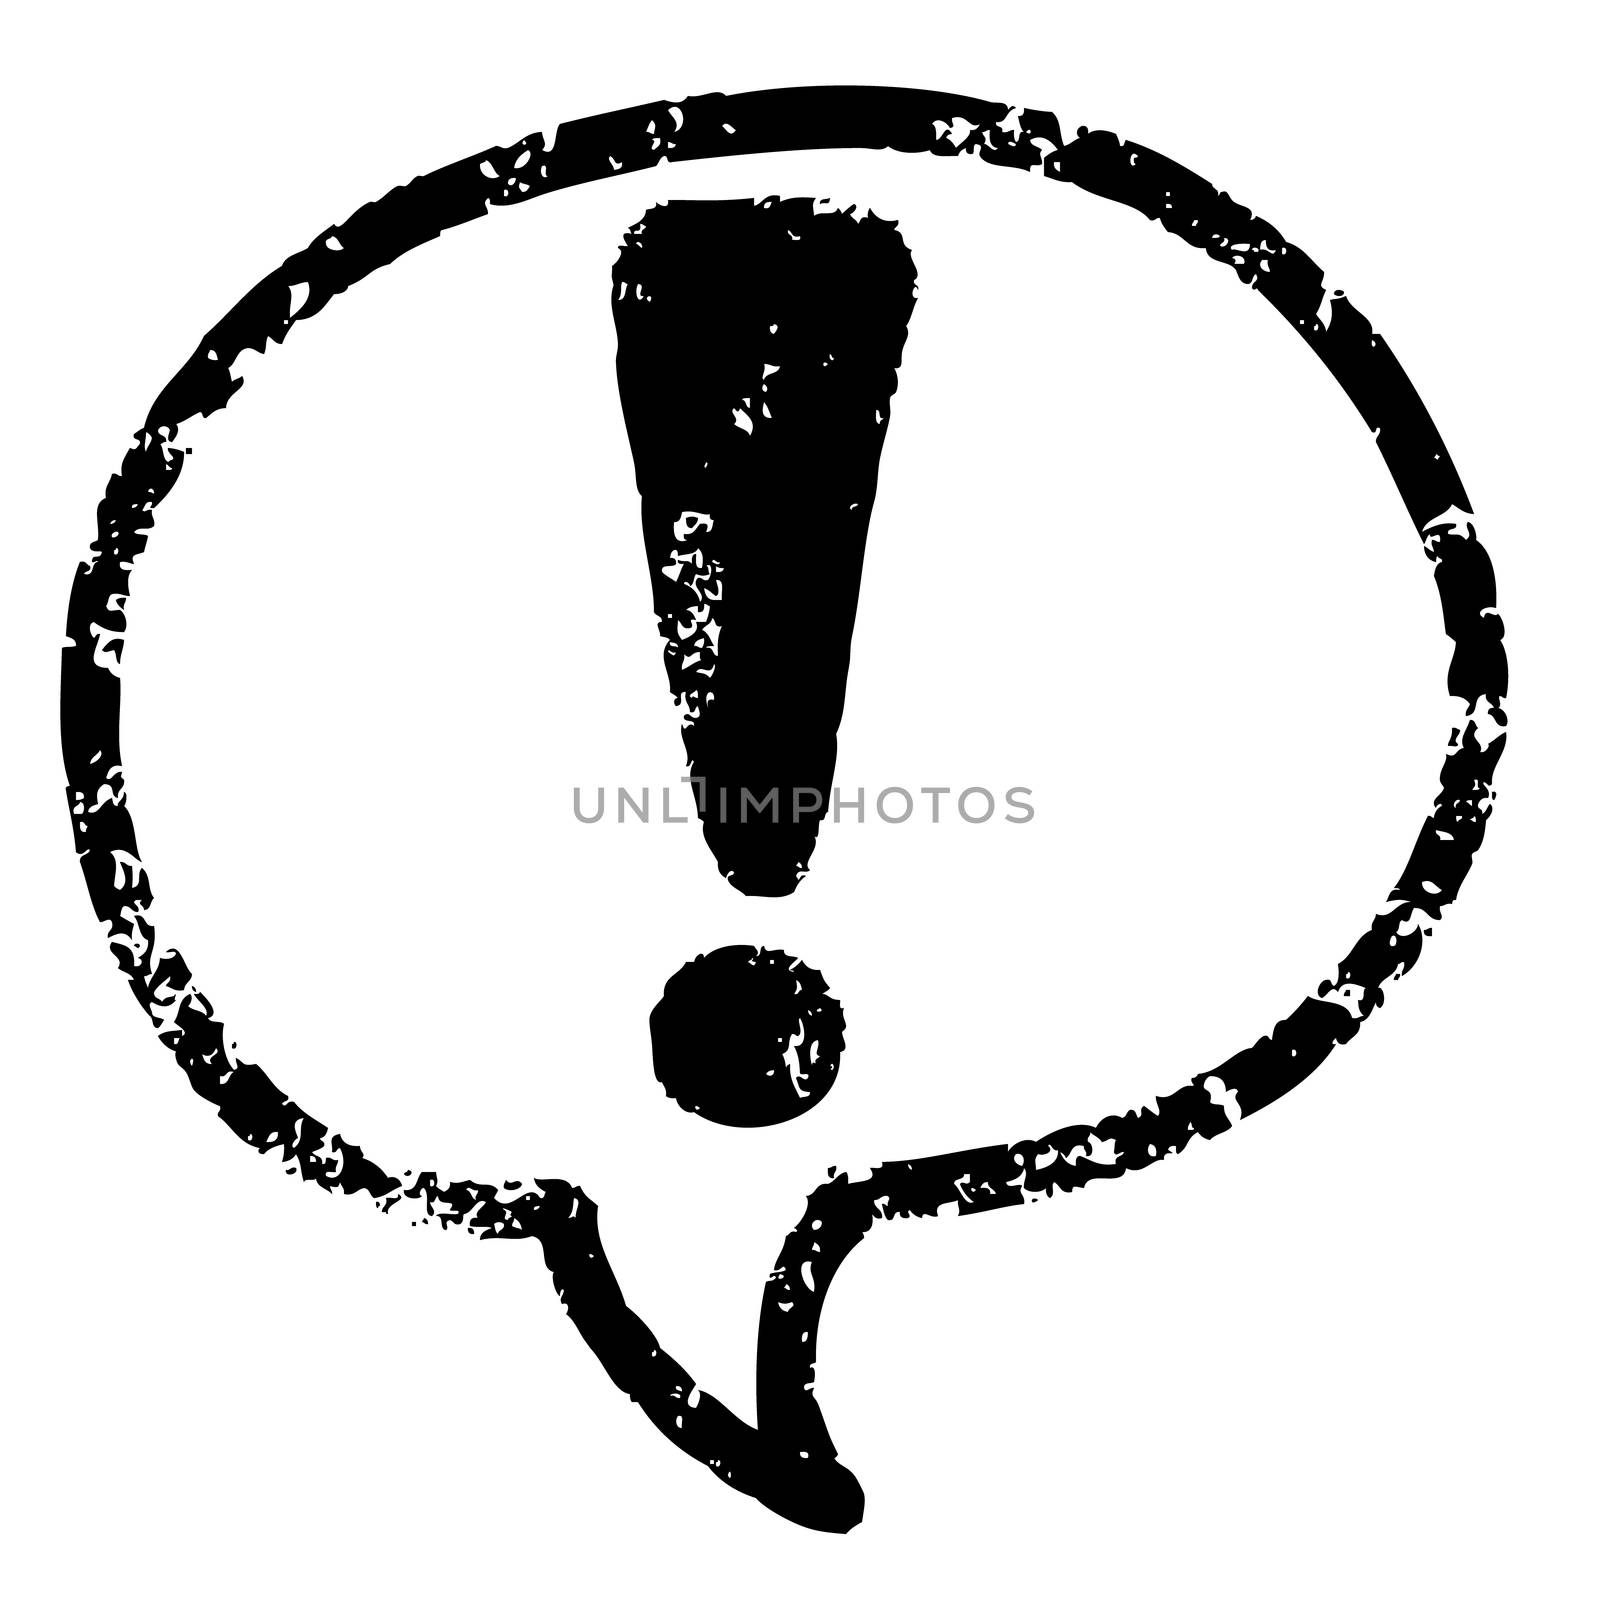 freehand sketch illustration of exclamation mark in speech bubble icon, doodle hand drawn